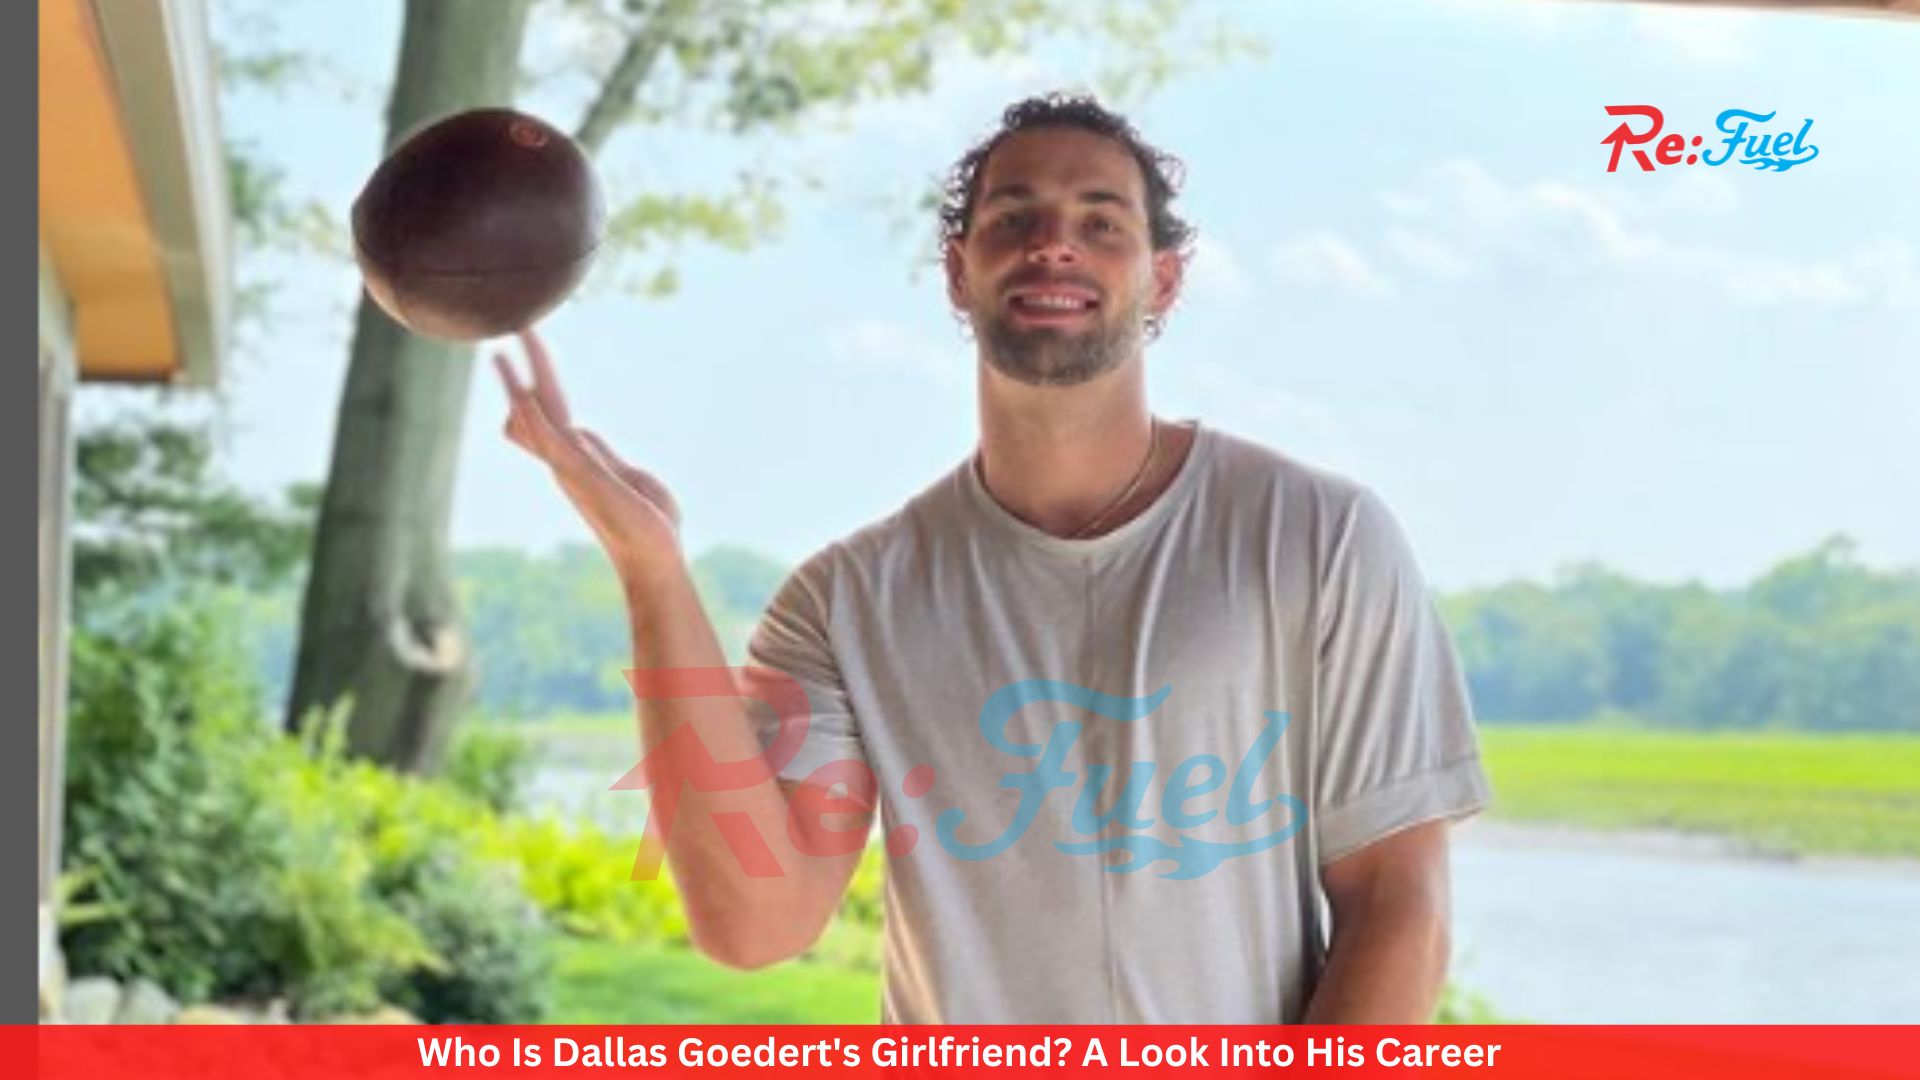 Who Is Dallas Goedert's Girlfriend? A Look Into His Career